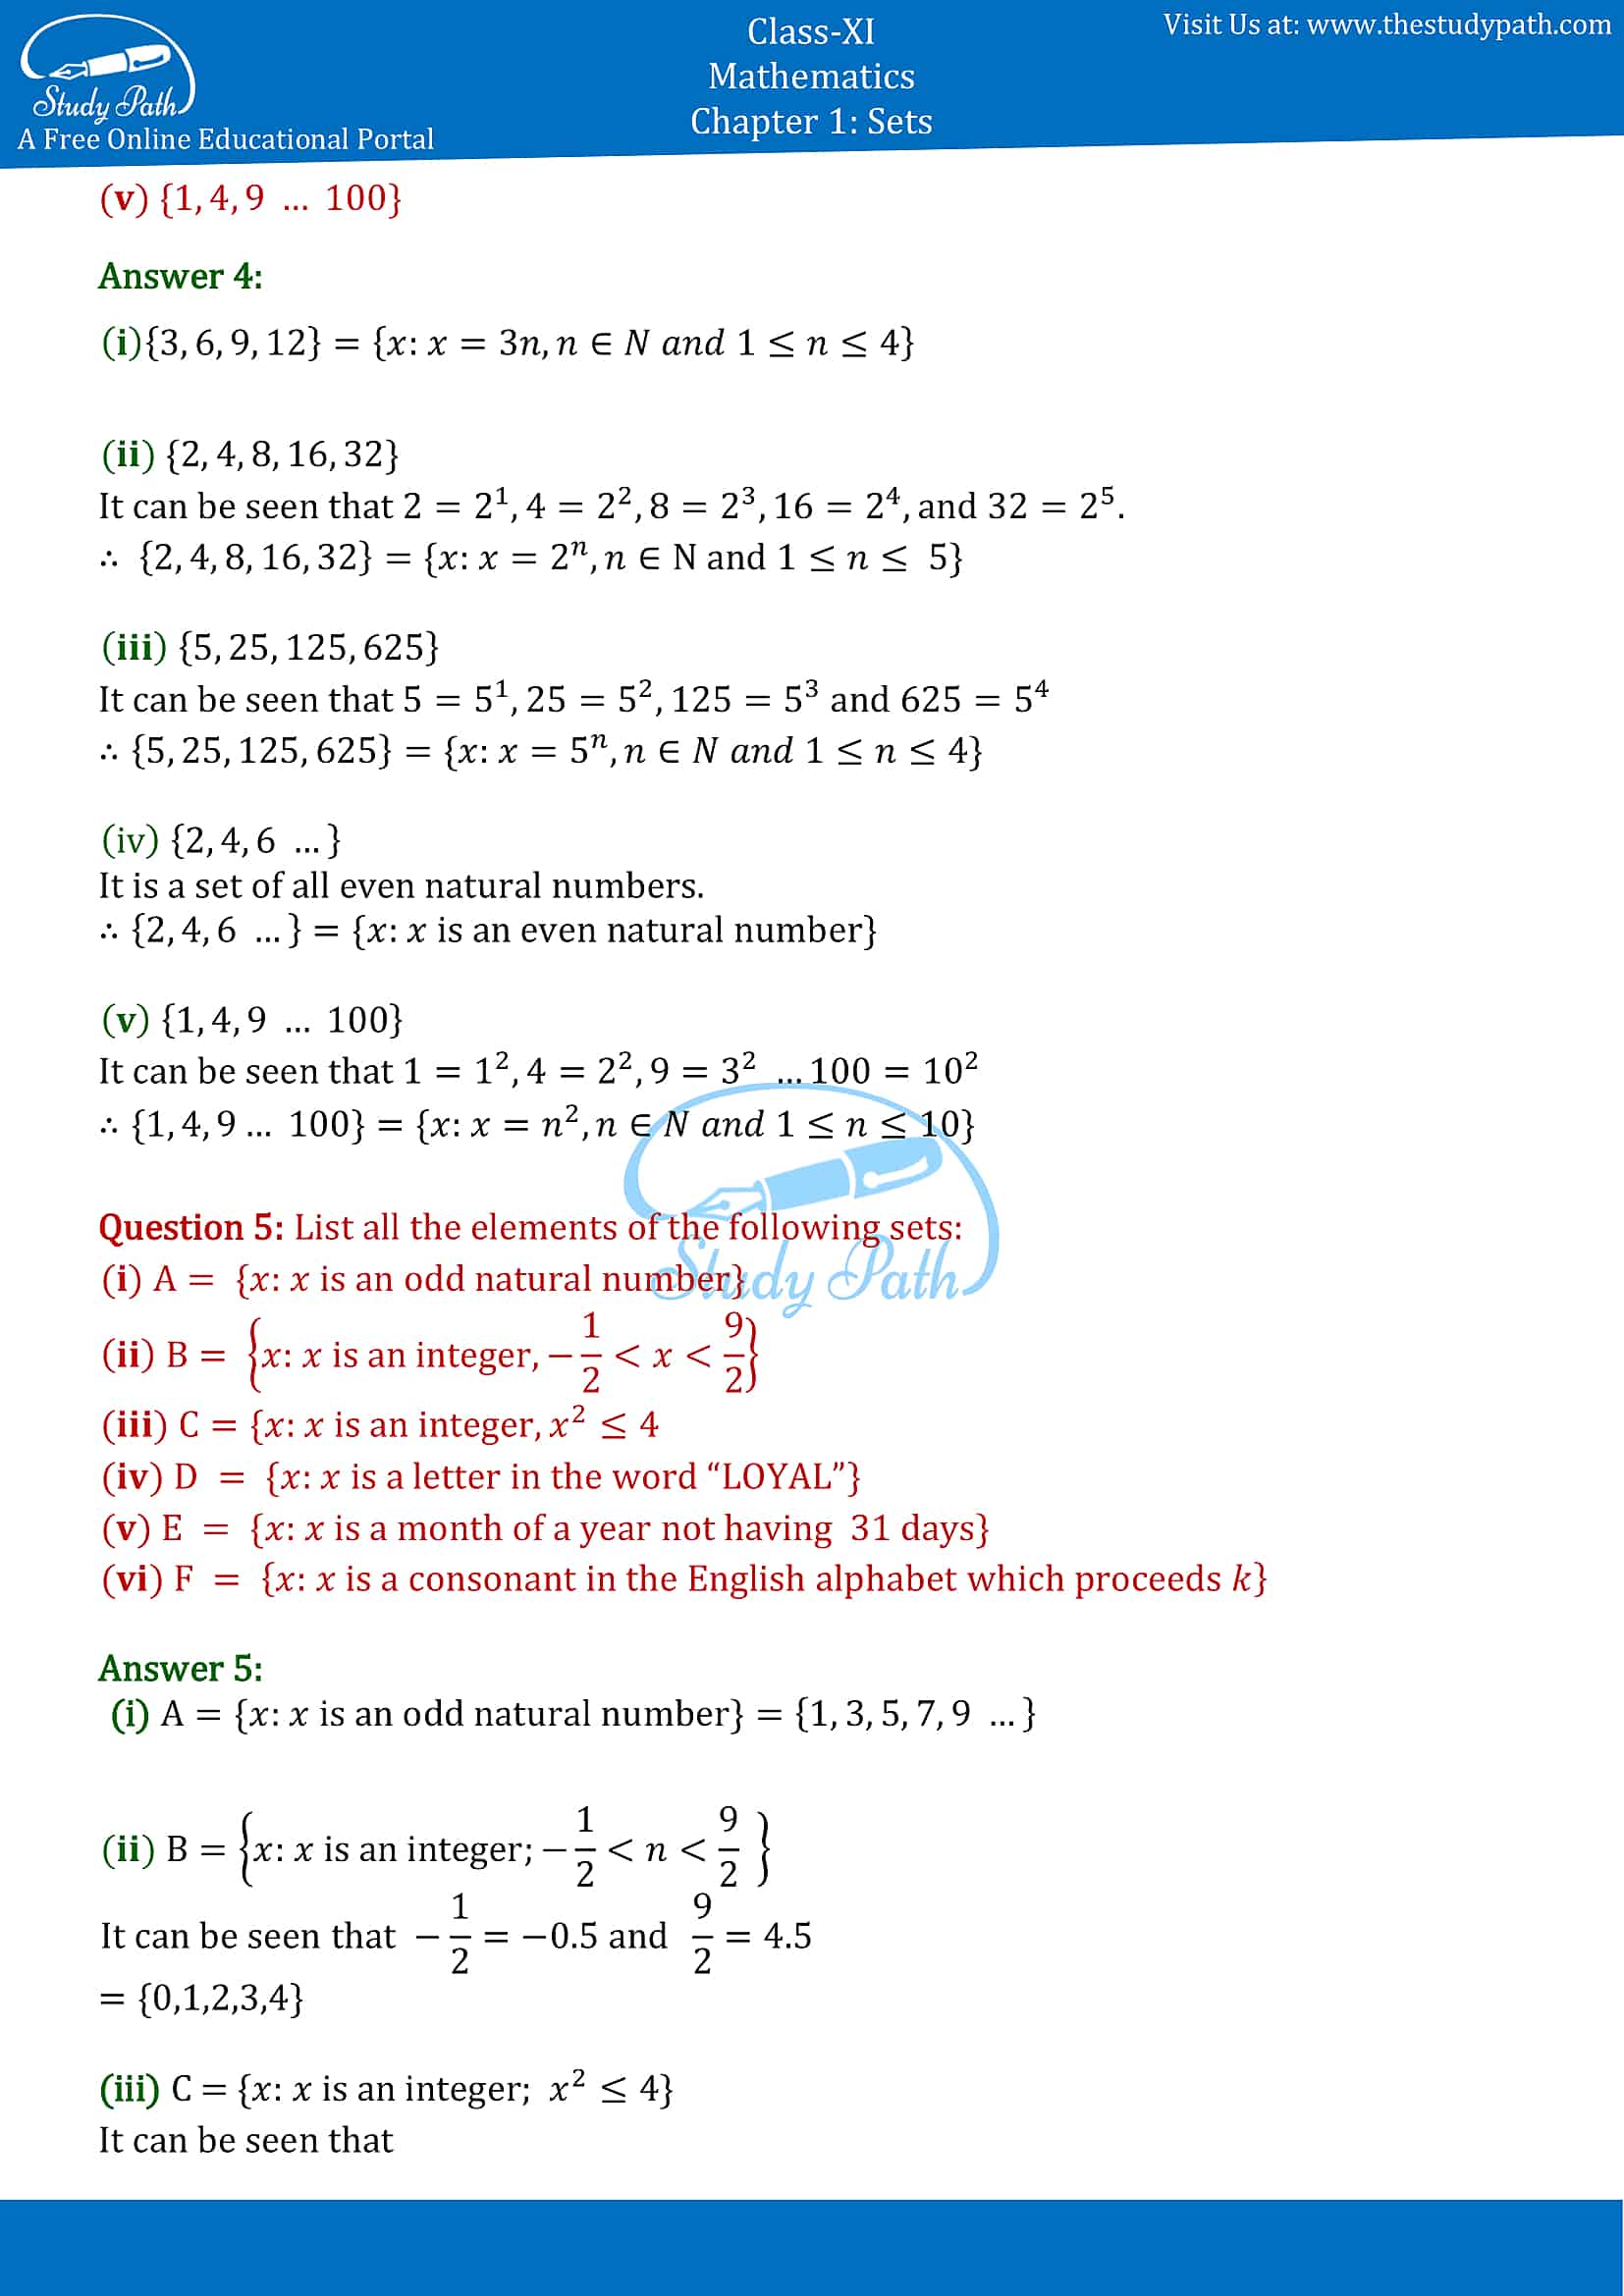 NCERT Solutions for Class 11 Maths chapter 1 sets Exercise 1.1